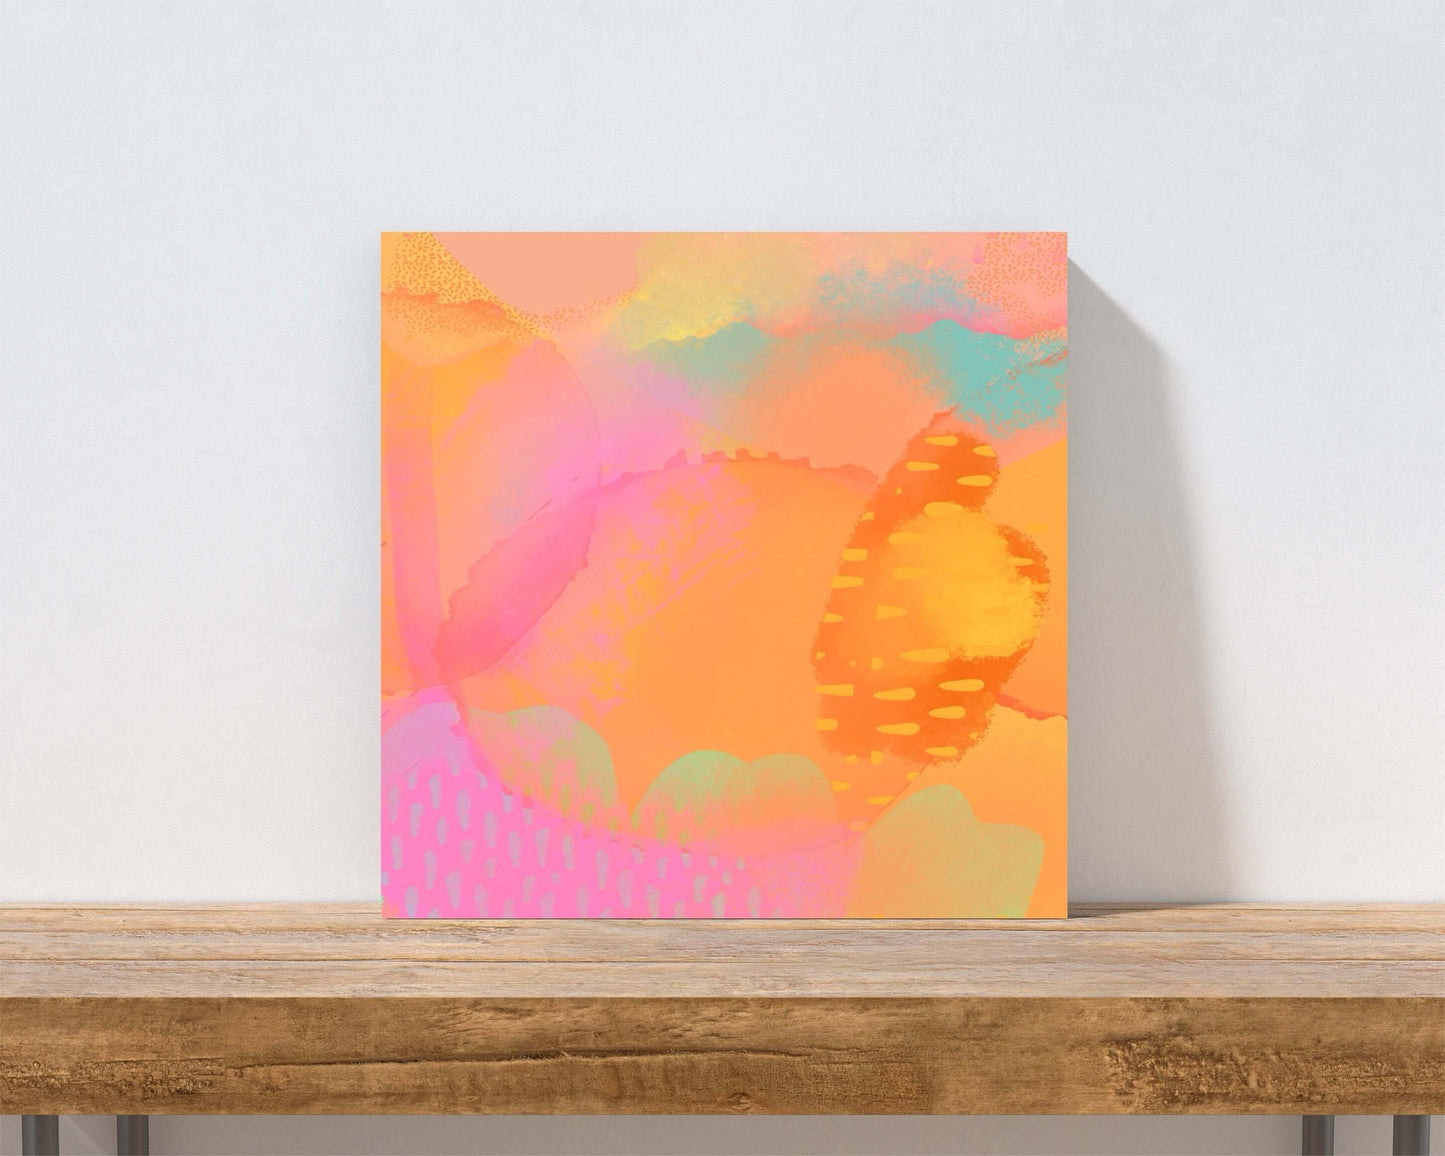 Bright Pastel Desert Hues of Orange, Yellow and Pink “Desert Delight” Abstract Art Canvas Print Wall Art Small Canvas on Shelf